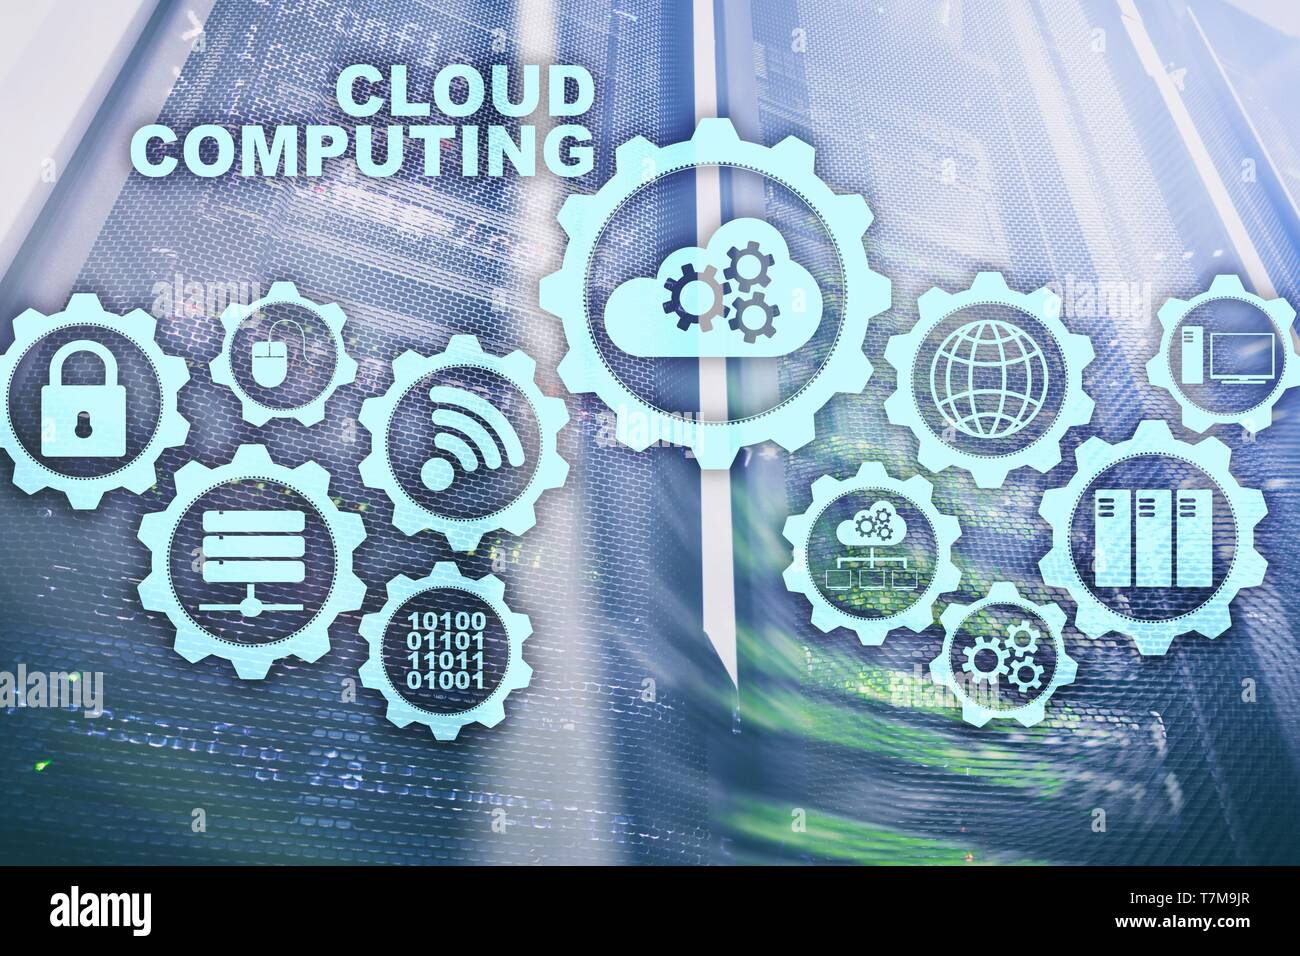 Cloud Computing, Technology Connectivity Concept on server room background Stock Photo